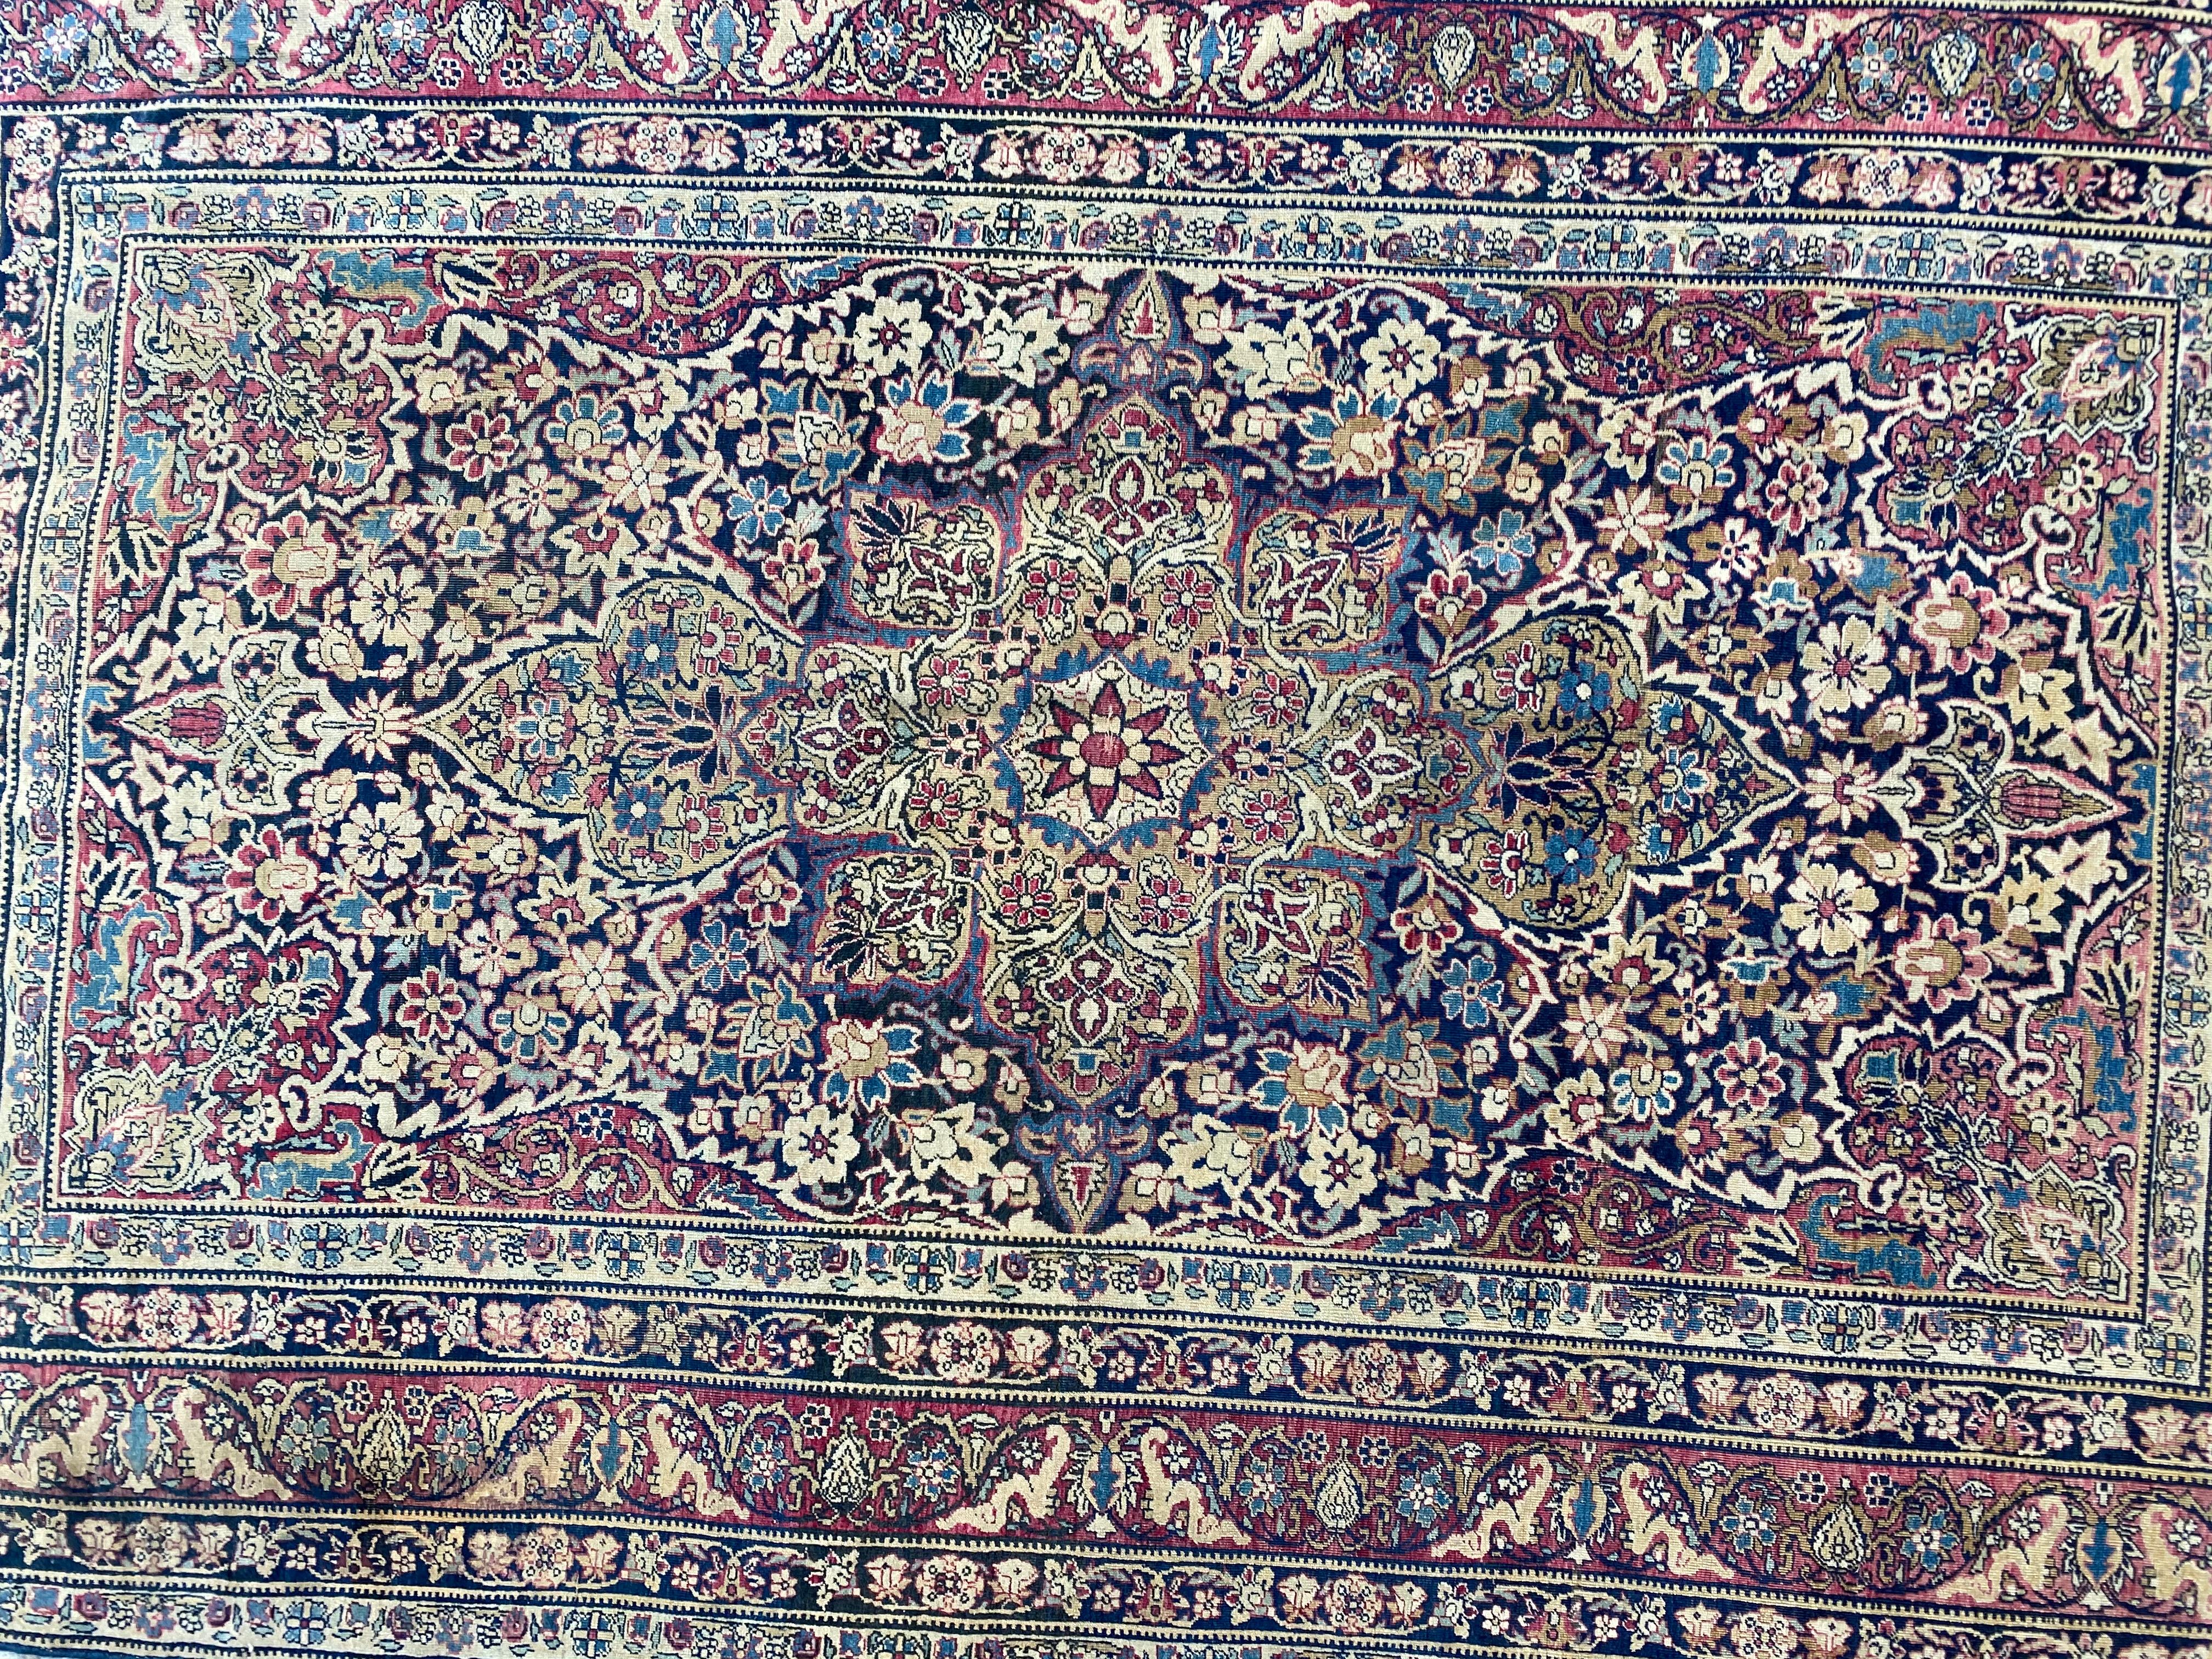 Exquisite late 19th-century rug featuring a captivating floral and central medallion design. Beautiful natural colors, including dark blue, yellow, blue, and red, meticulously hand-knotted with wool velvet on a cotton foundation. The deep blue